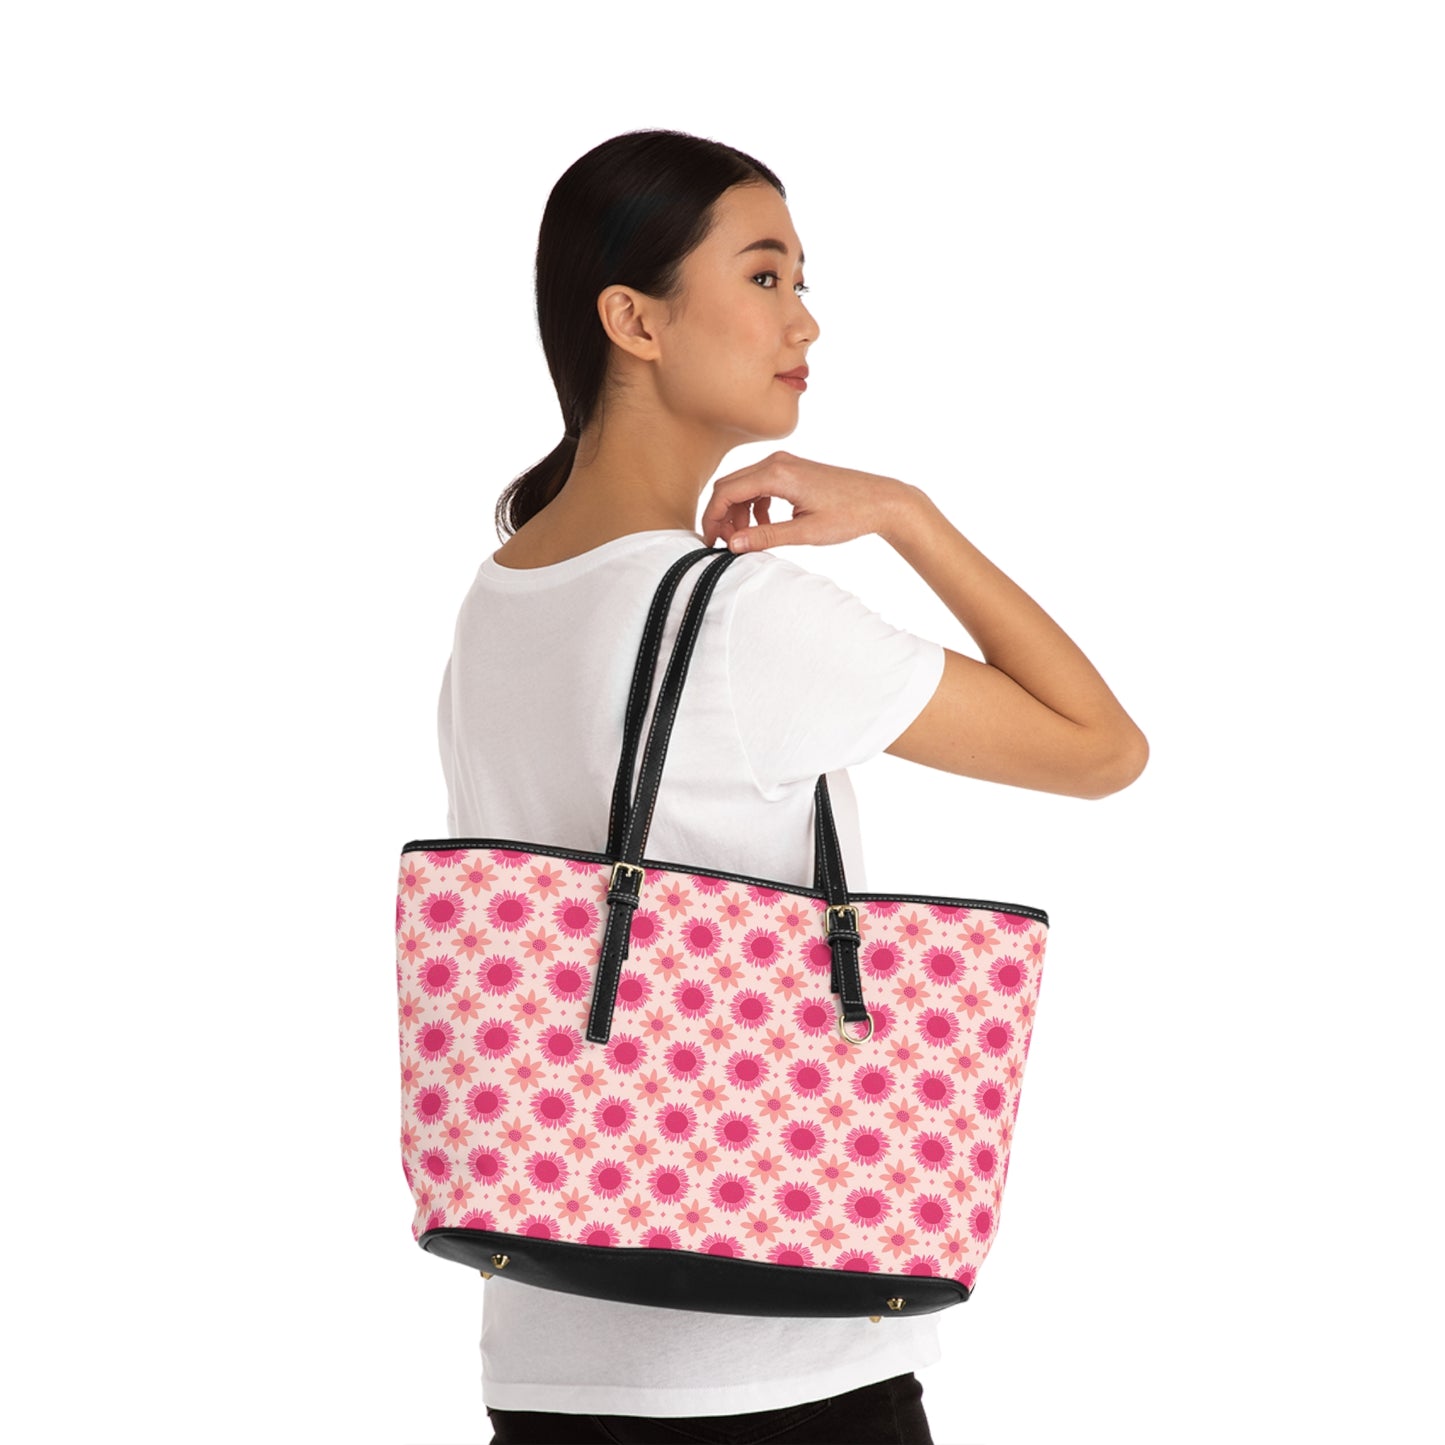 Retro Pink Sunflowers on PU Leather Shoulder Bag